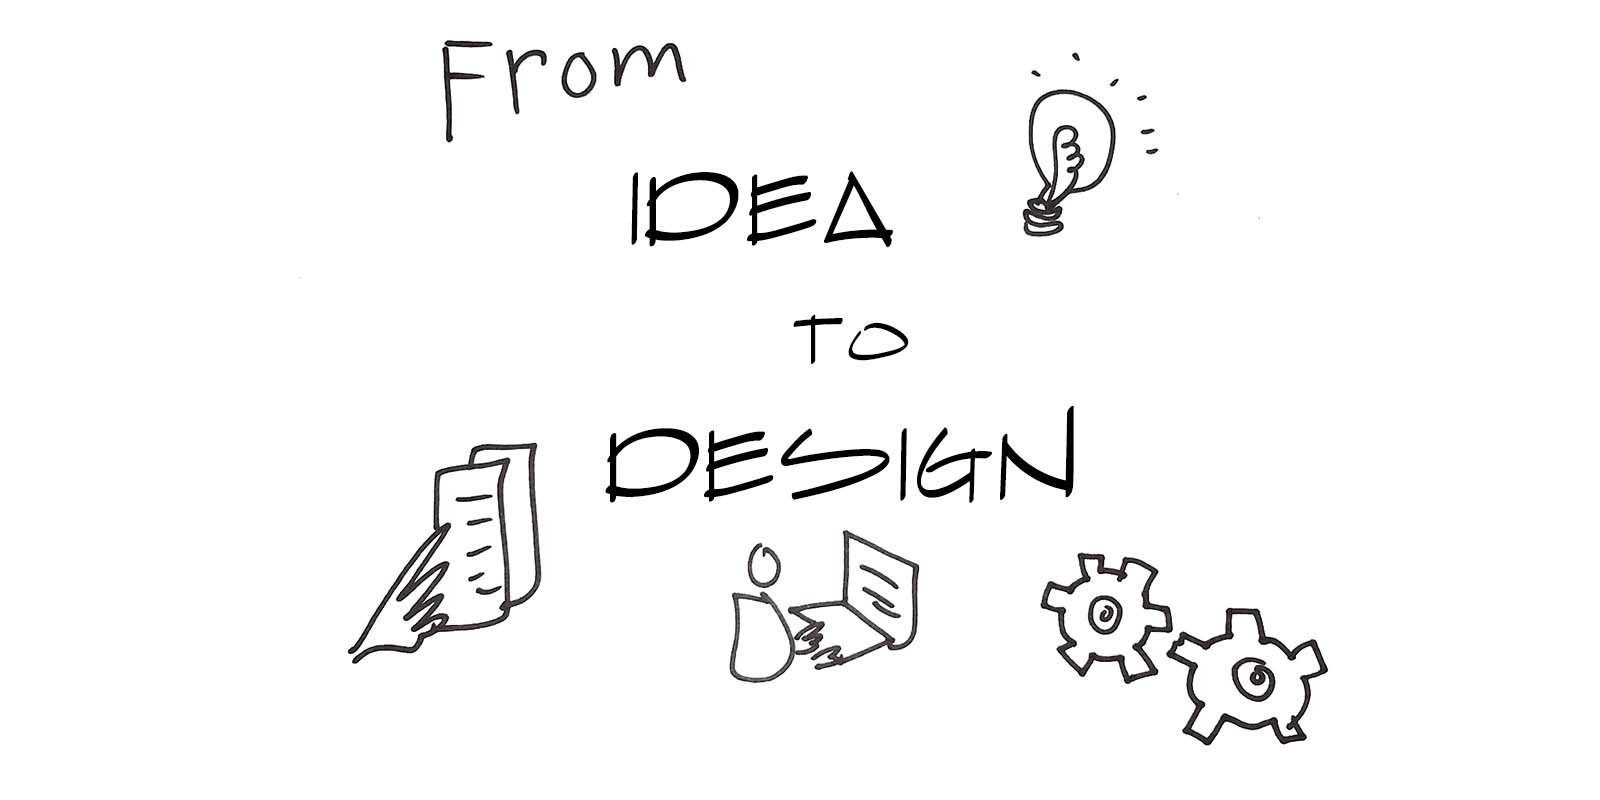 From idea to design